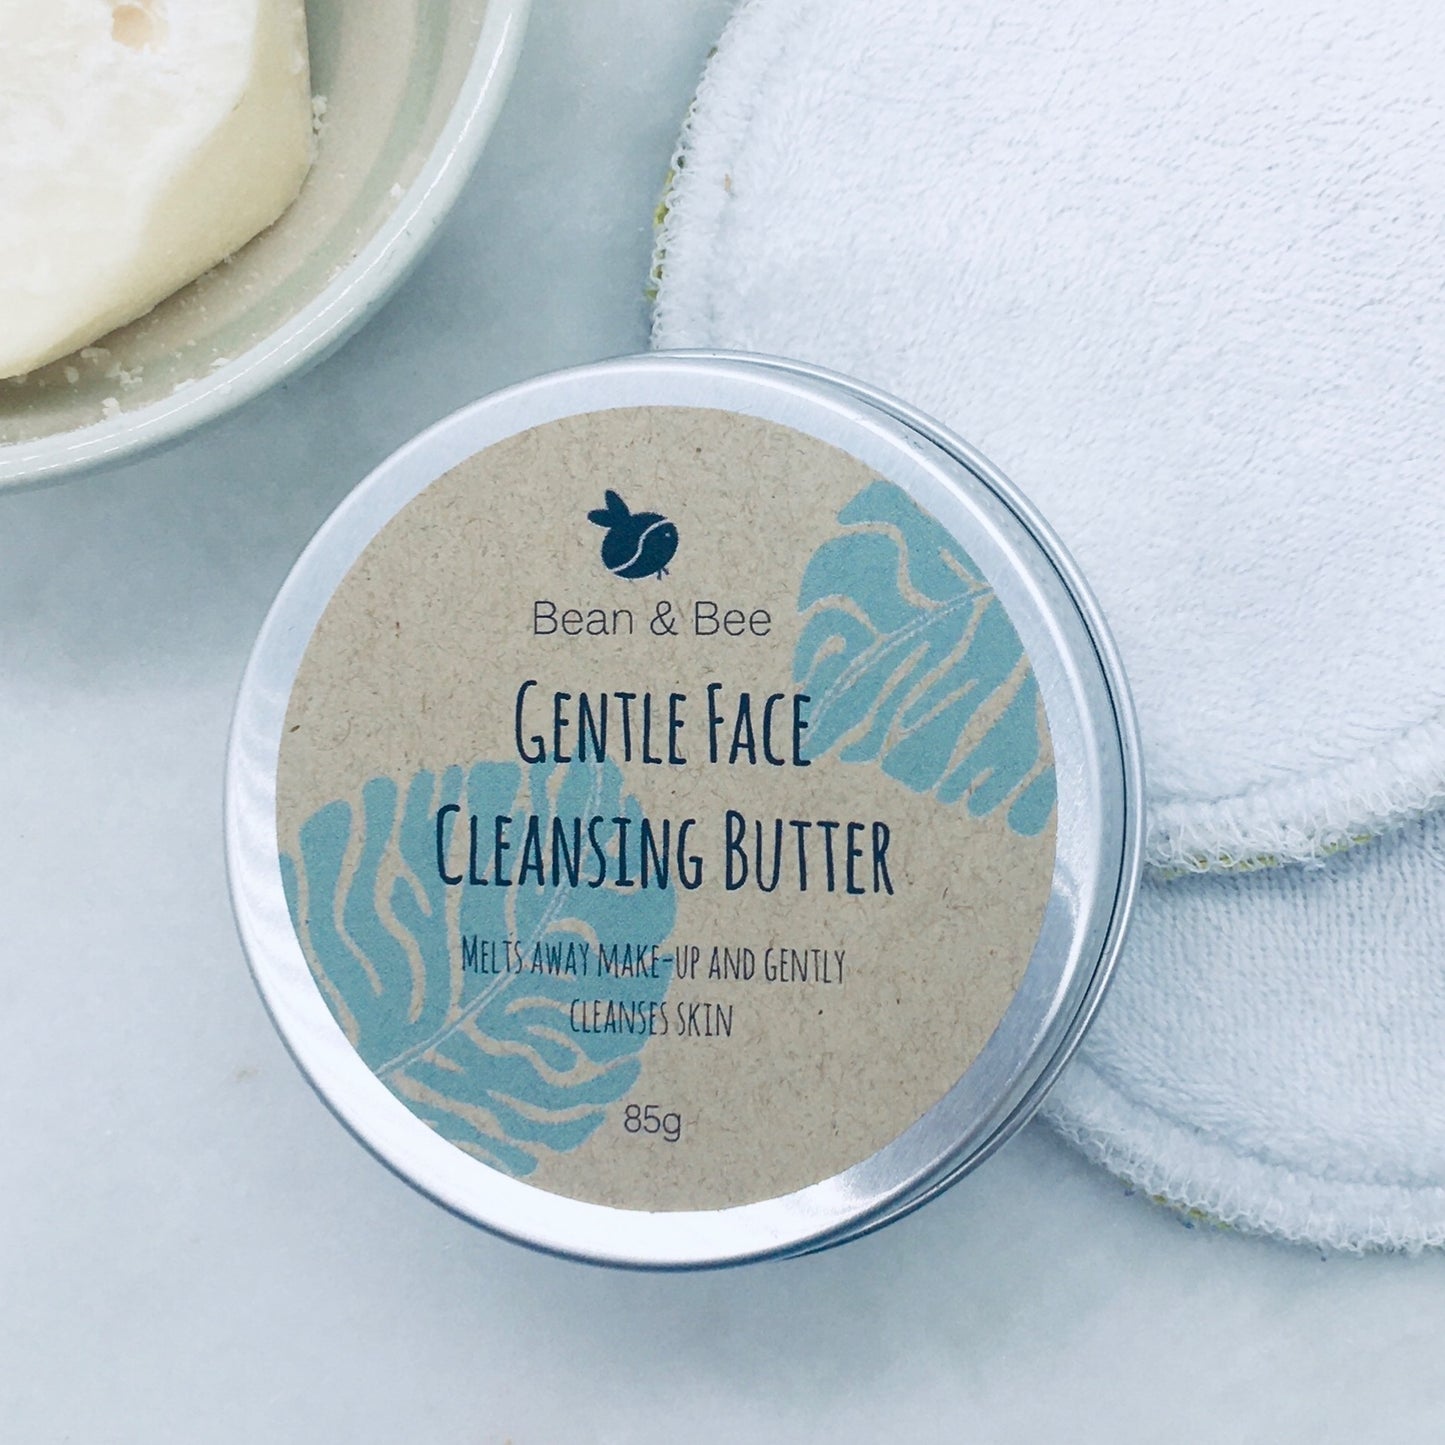 Gentle Face Cleansing Butter - Bean and Bee